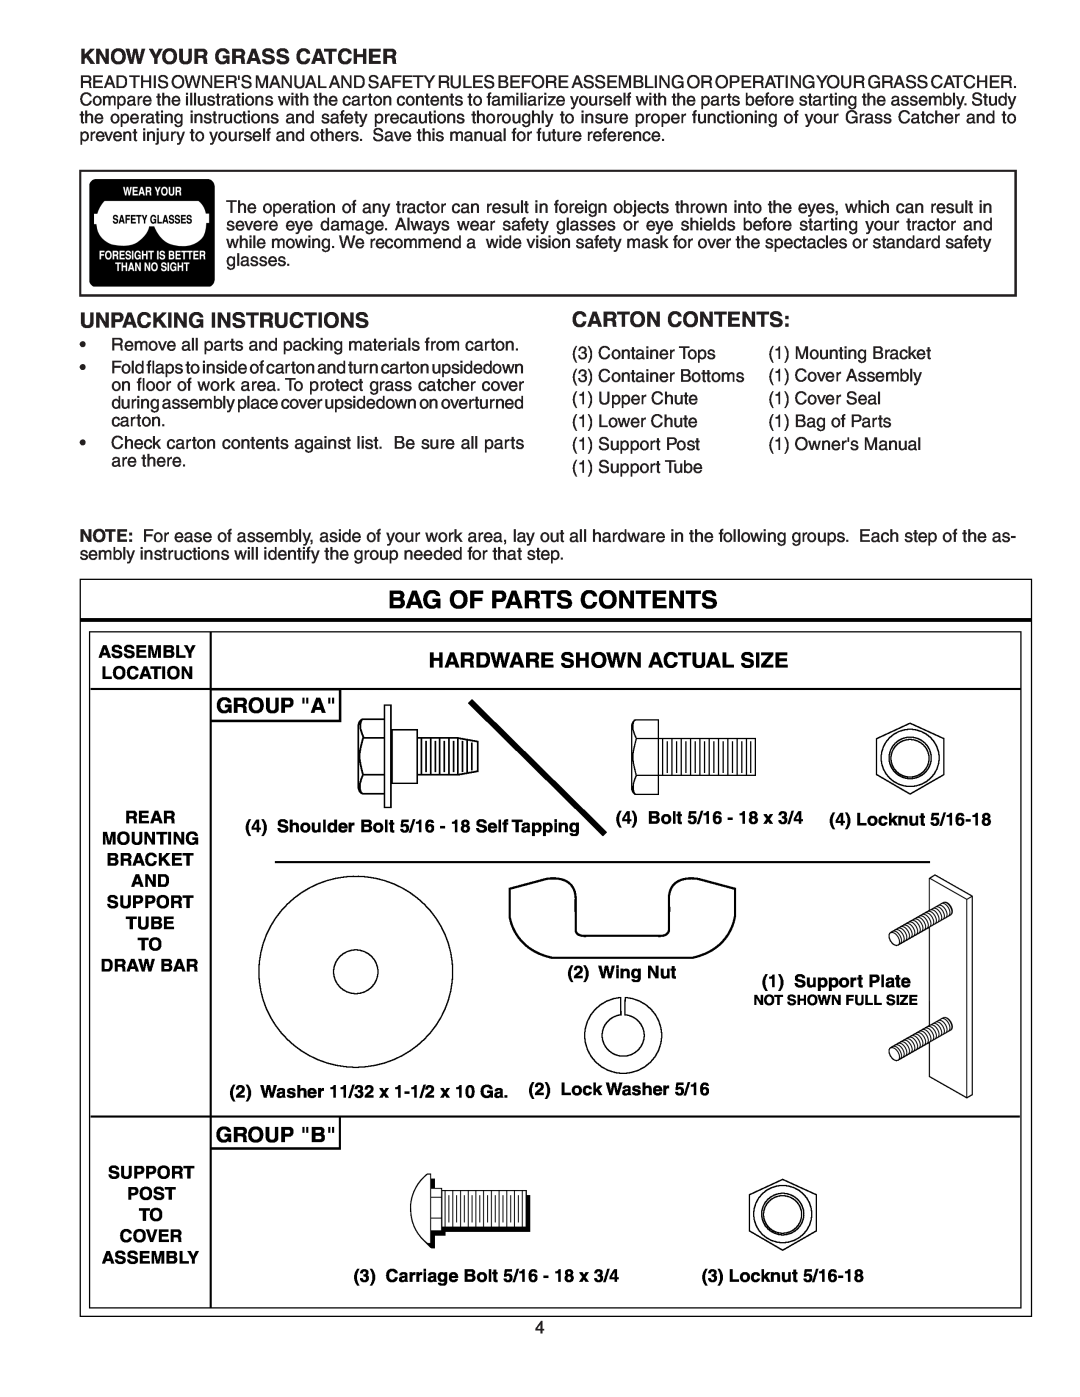 Poulan 954 04 06-06 Bag Of Parts Contents, Know Your Grass Catcher, Unpacking Instructions, Carton Contents, Group A 